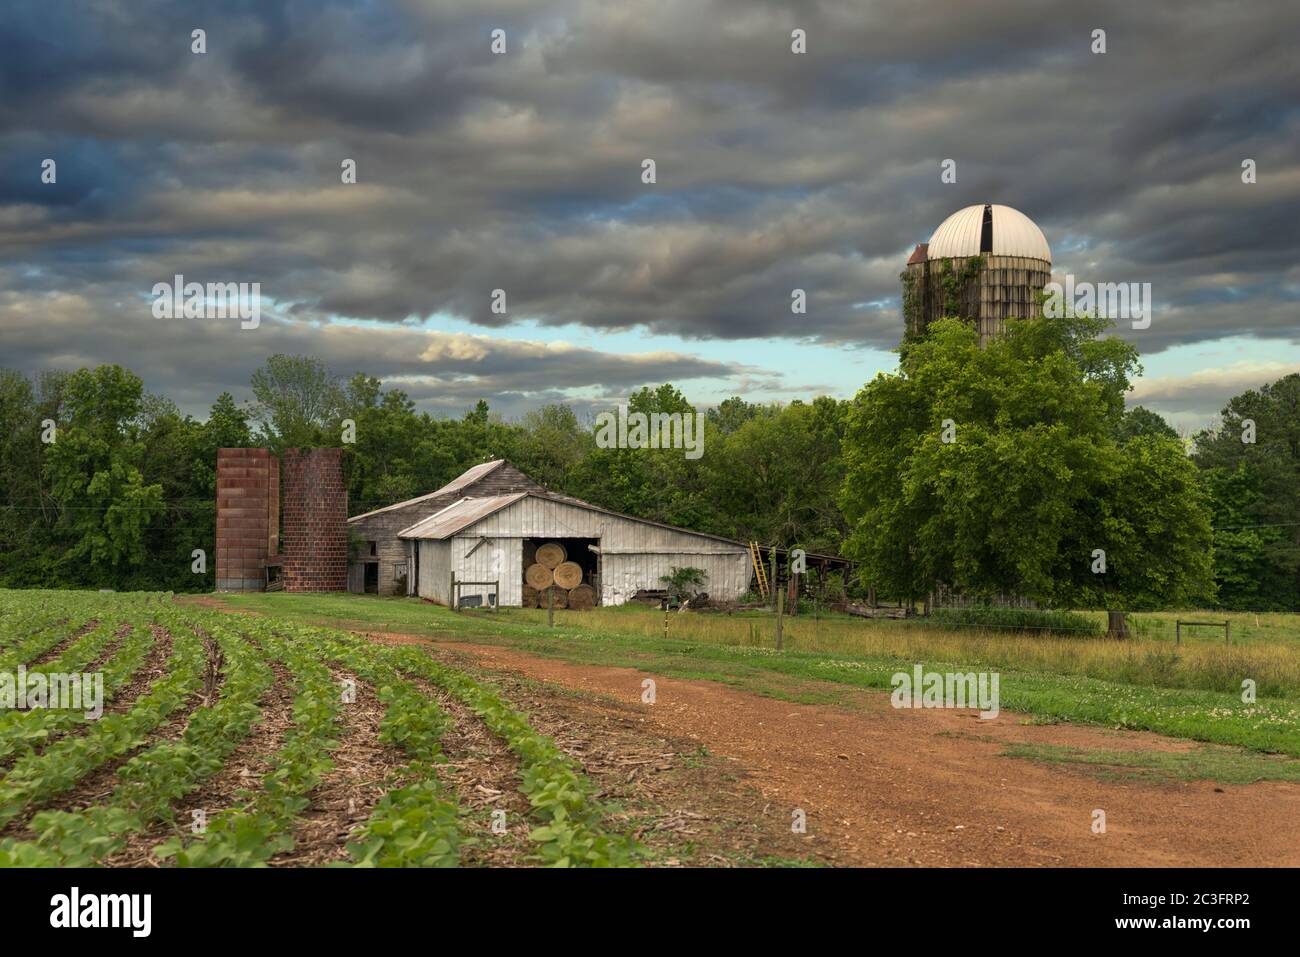 farm with silos and dirt roat with crops on stormy day with dark clouds Stock Photo